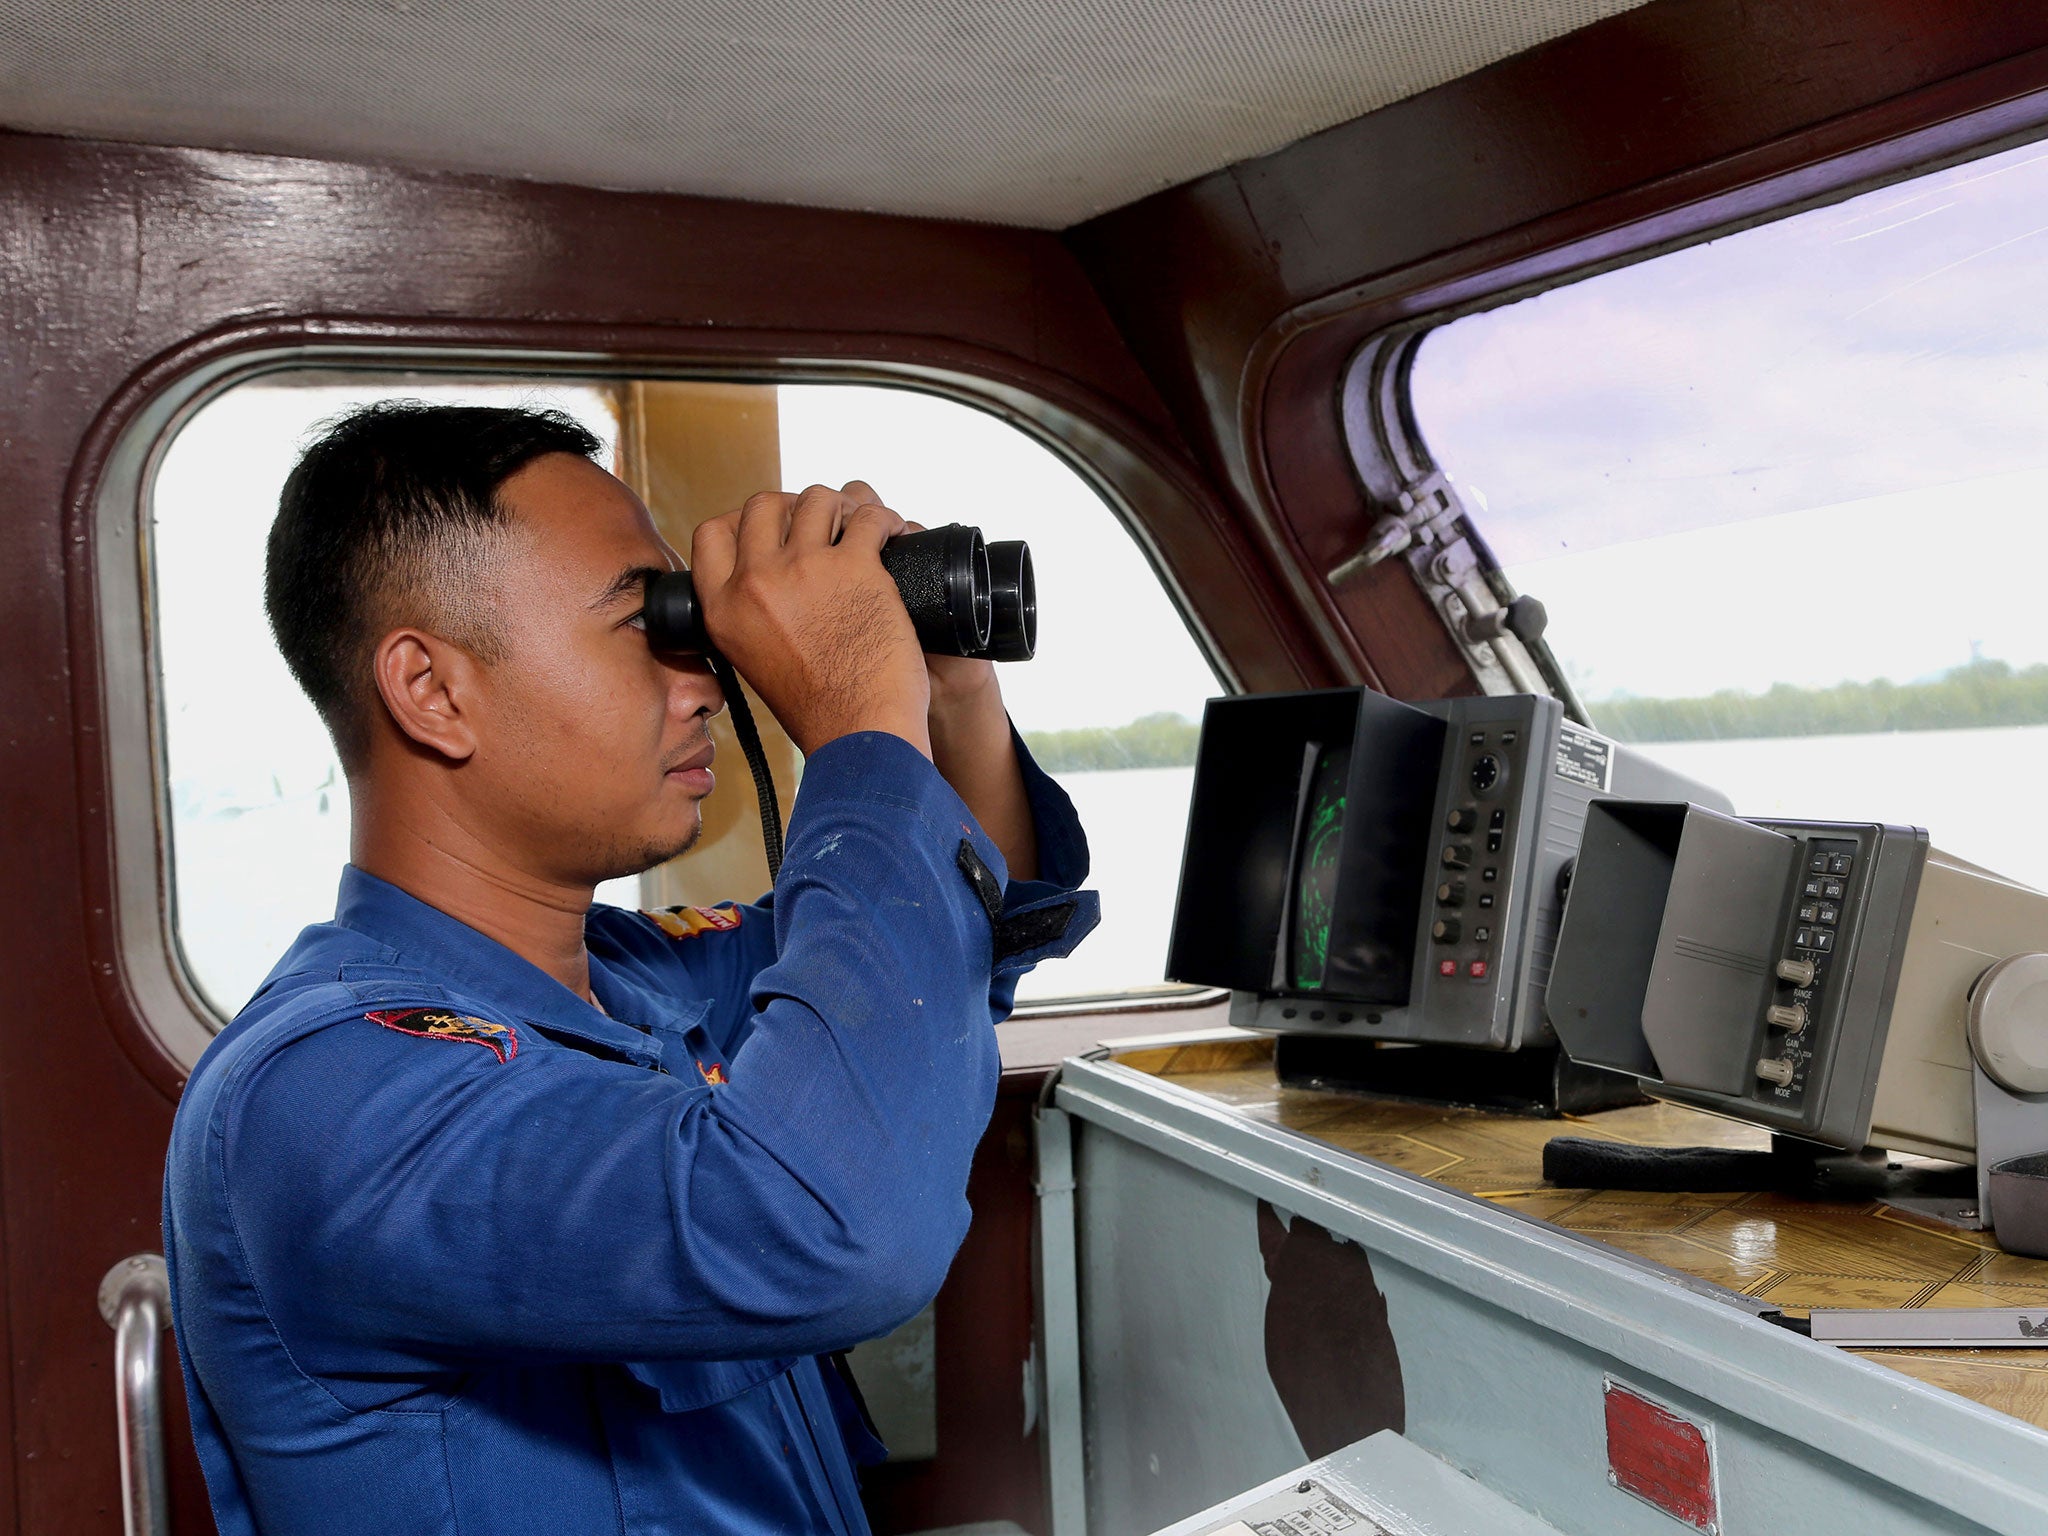 Authorities are searching for missing AirAsia flight QZ8501